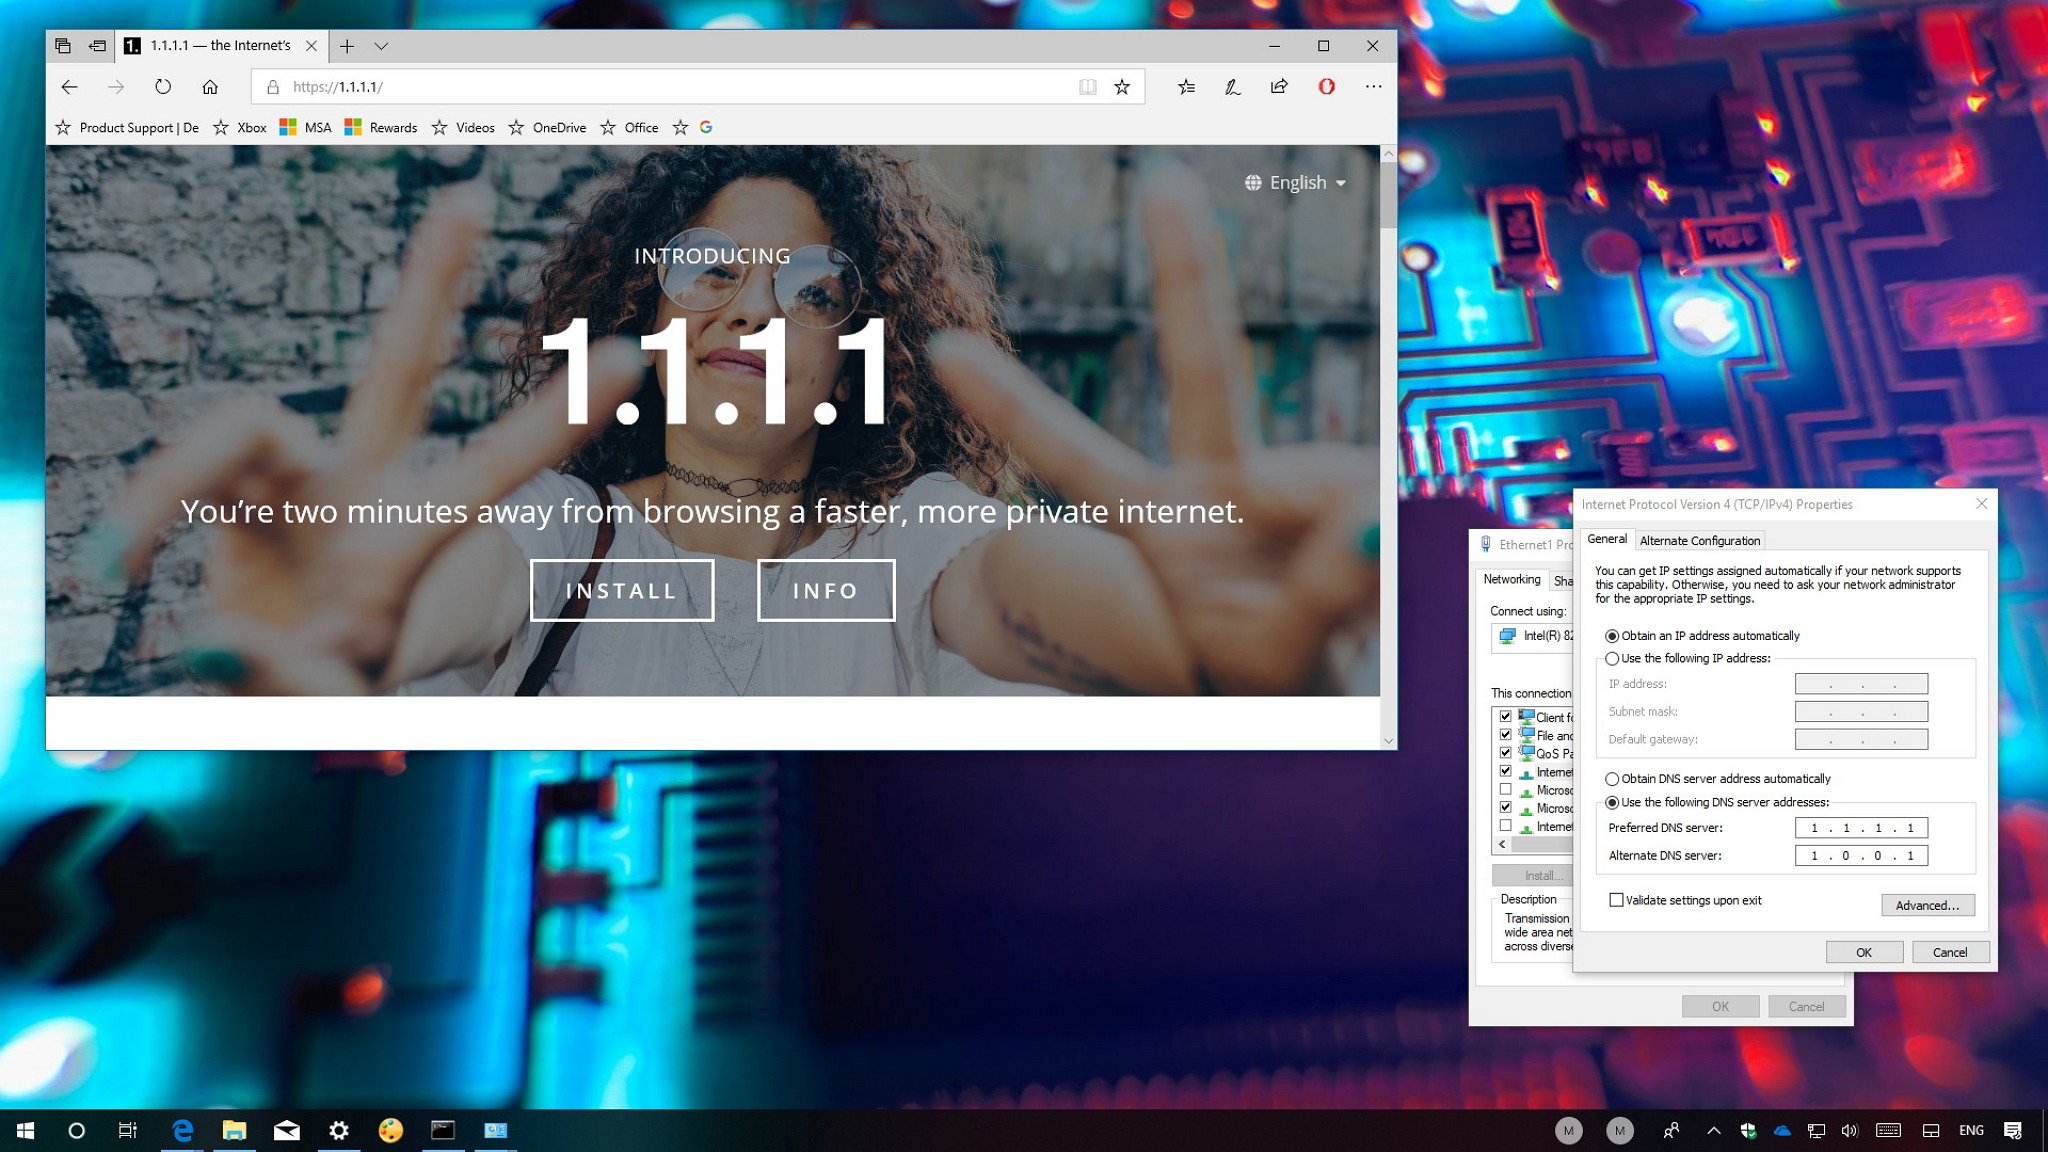 How To Configure Cloudflare S 1 1 1 1 Dns Service On Windows 10 Or Your Router Windows Central